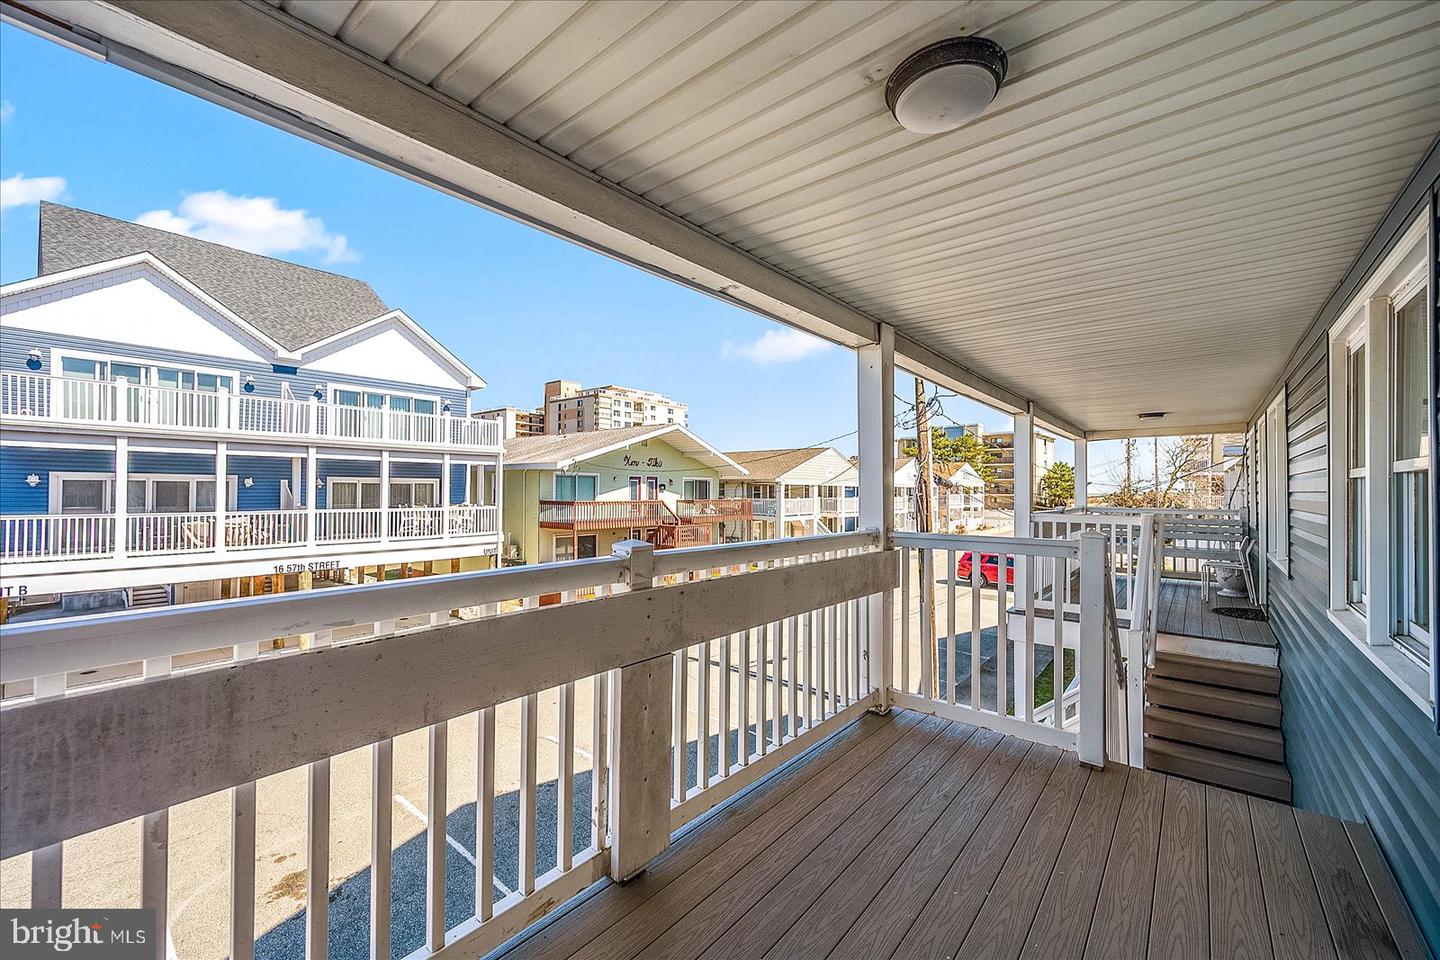 MDWO2019490-802929060474-2024-03-16-10-46-20 15 57th St | Ocean City, MD Real Estate For Sale | MLS# Mdwo2019490  - 1st Choice Properties